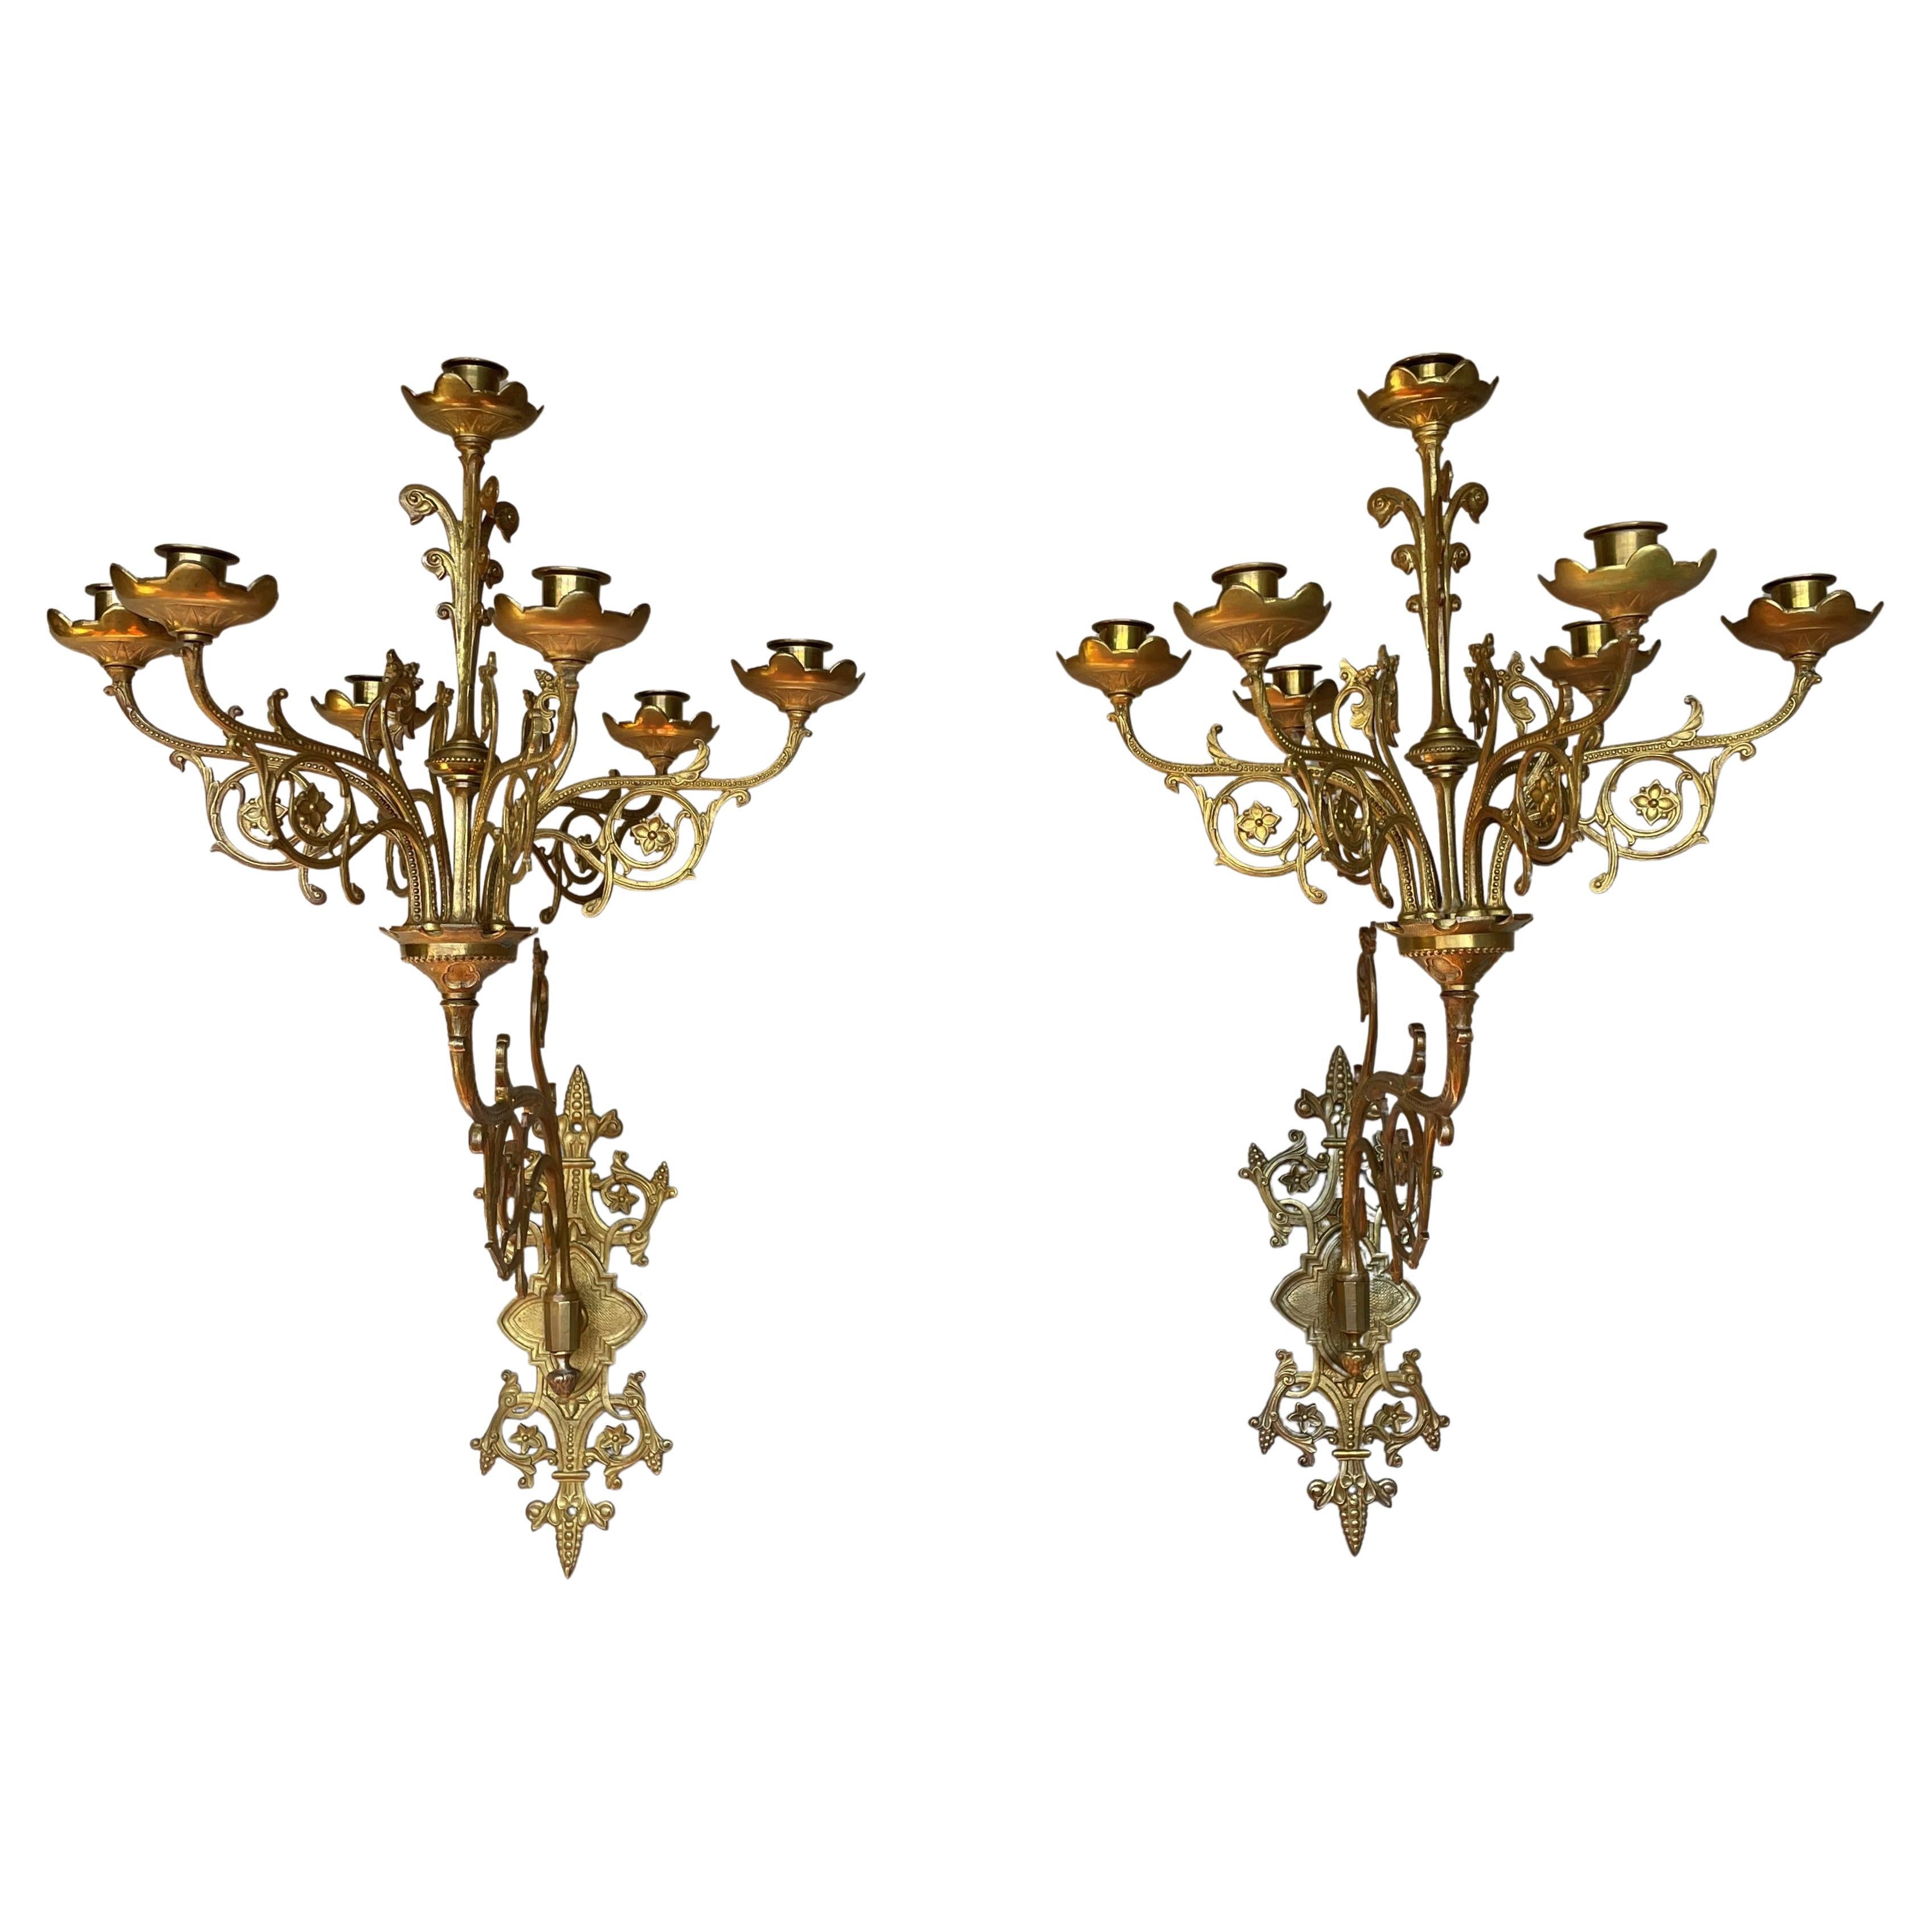 Large Pair of Gothic Revival Gilt Bronze Church Wall Candelabras Candle Sconces For Sale